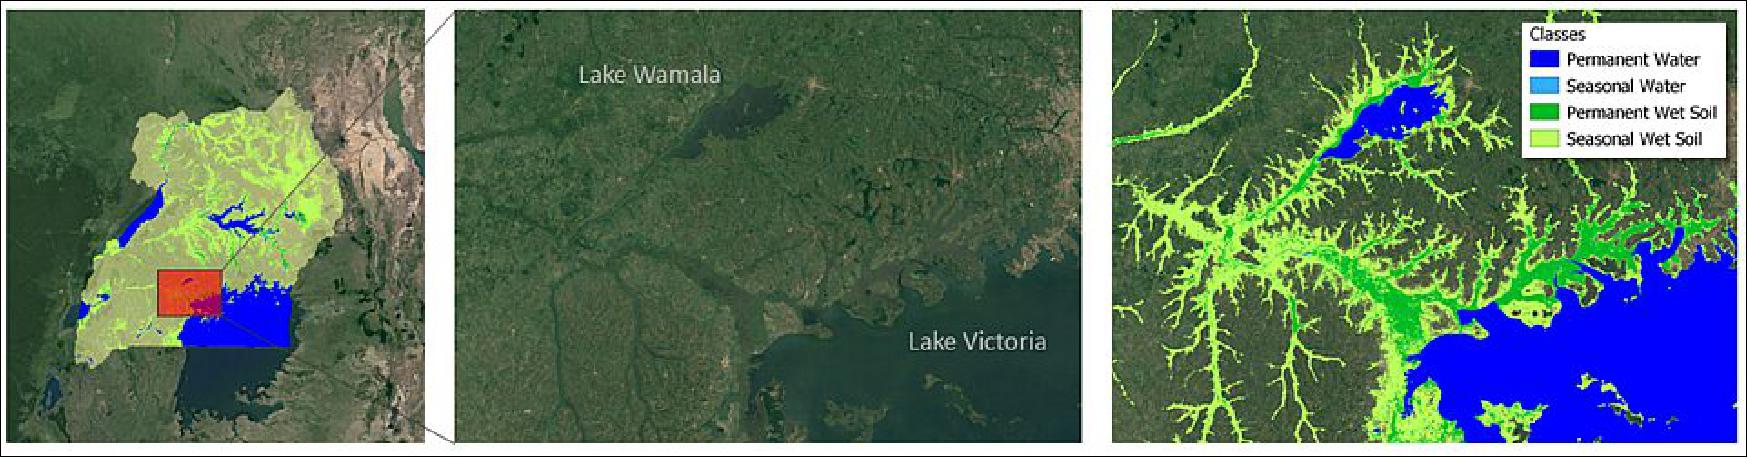 Figure 3: These images show wetlands along the shore of Lake Victoria and Lake Wamala. Wetlands form along narrow water streams, where the groundwater level is high, and regular floods occur. The maps show that some of the wetlands have a strong seasonal component, whereas others are moist throughout the year (GlobWetland Africa Extension on Wetland Inventory)